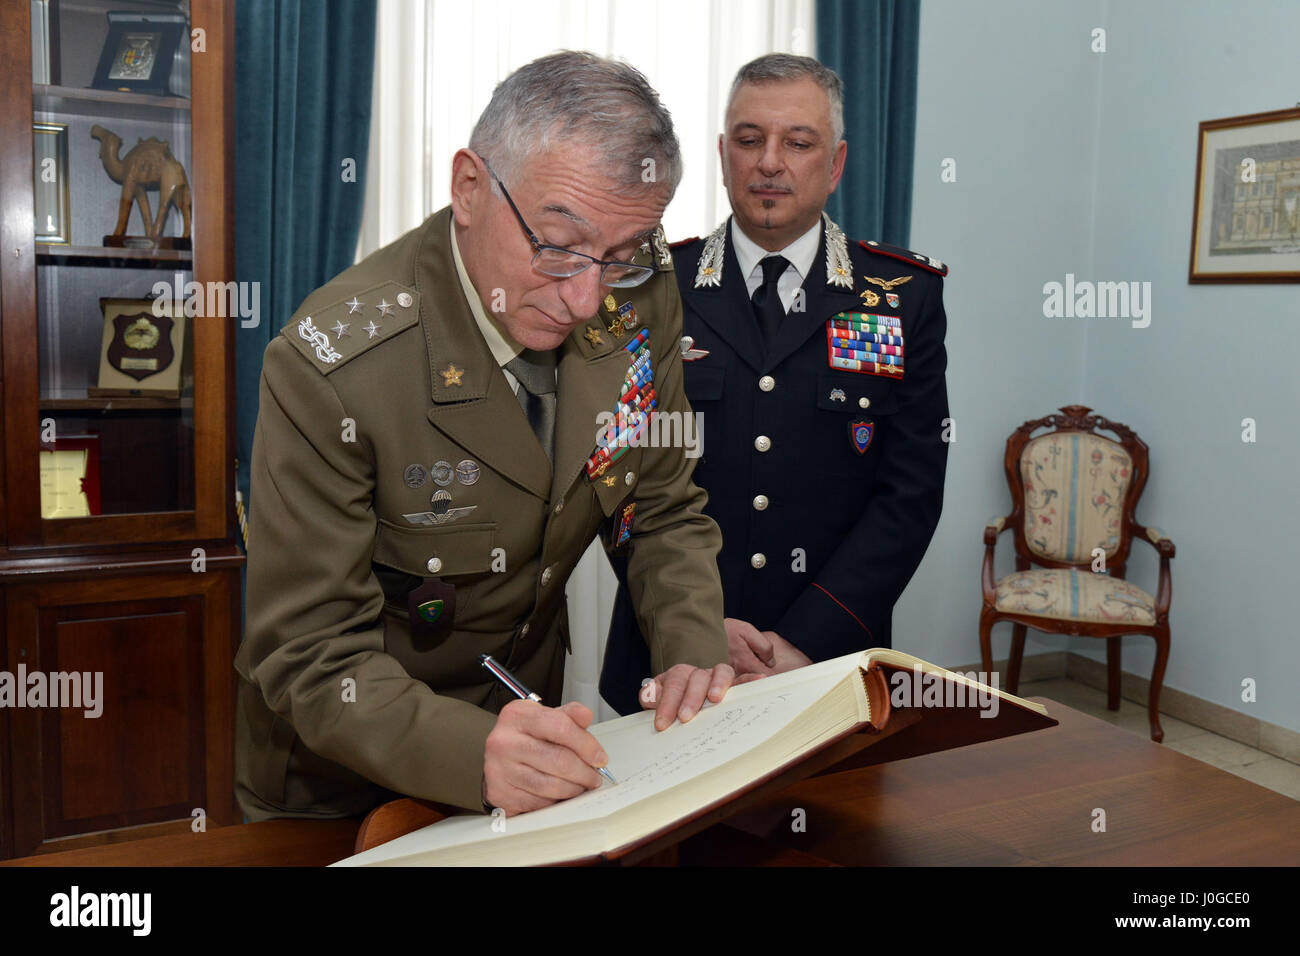 Gen. Claudio Graziano, Italian Army Chief of Staff, signs the guest of honor book, during visit at Center of Excellence for Stability Police Units (CoESPU) Vicenza, Italy, April 1, 2017. (U.S. Army Photo by Visual Information Specialist Paolo Bovo/released) Stock Photo